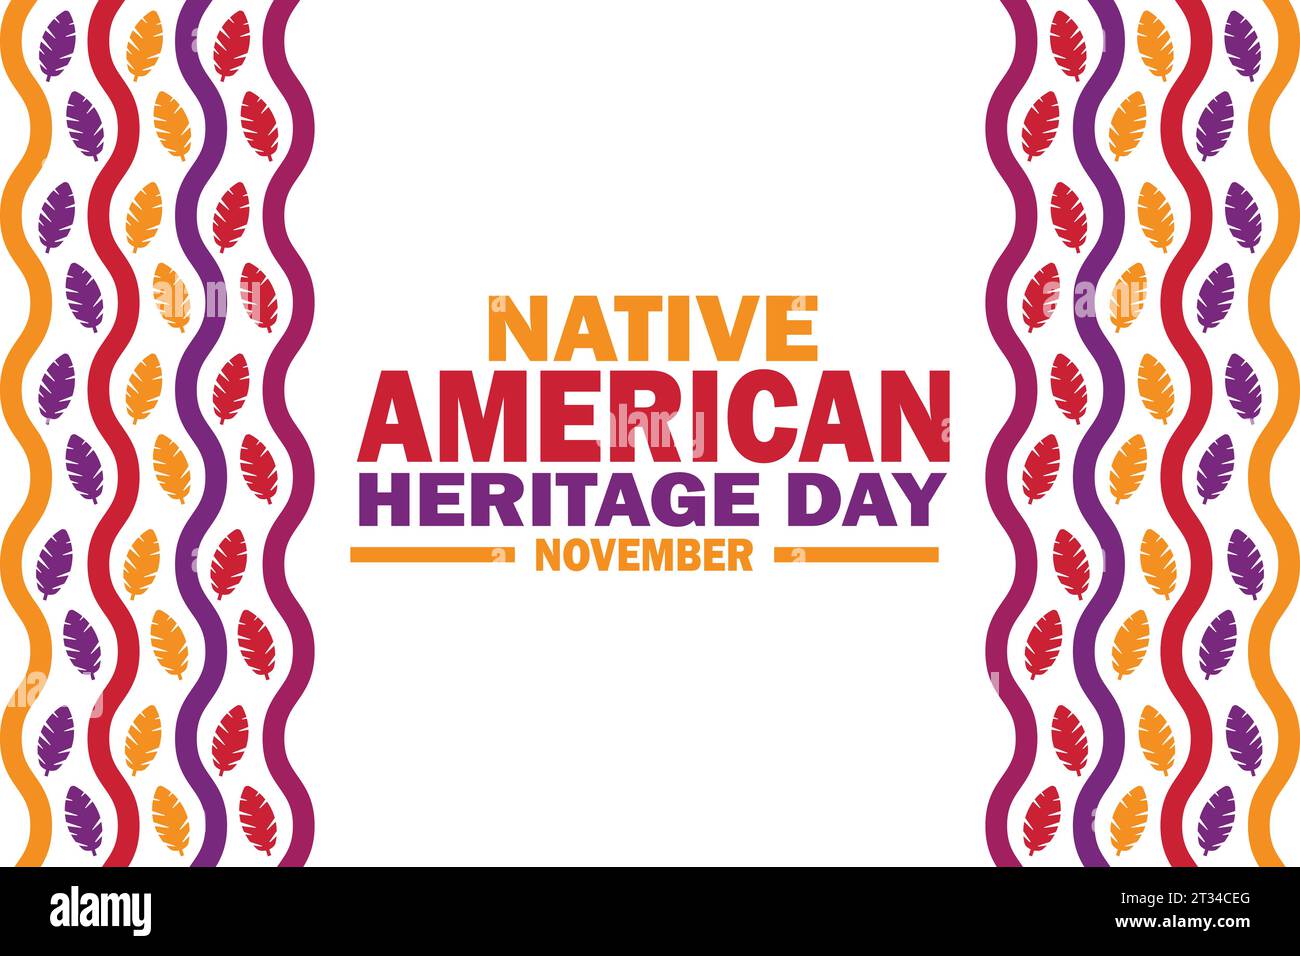 Native American Heritage Day Vector illustration. November. Suitable for greeting card, poster and banner Stock Vector